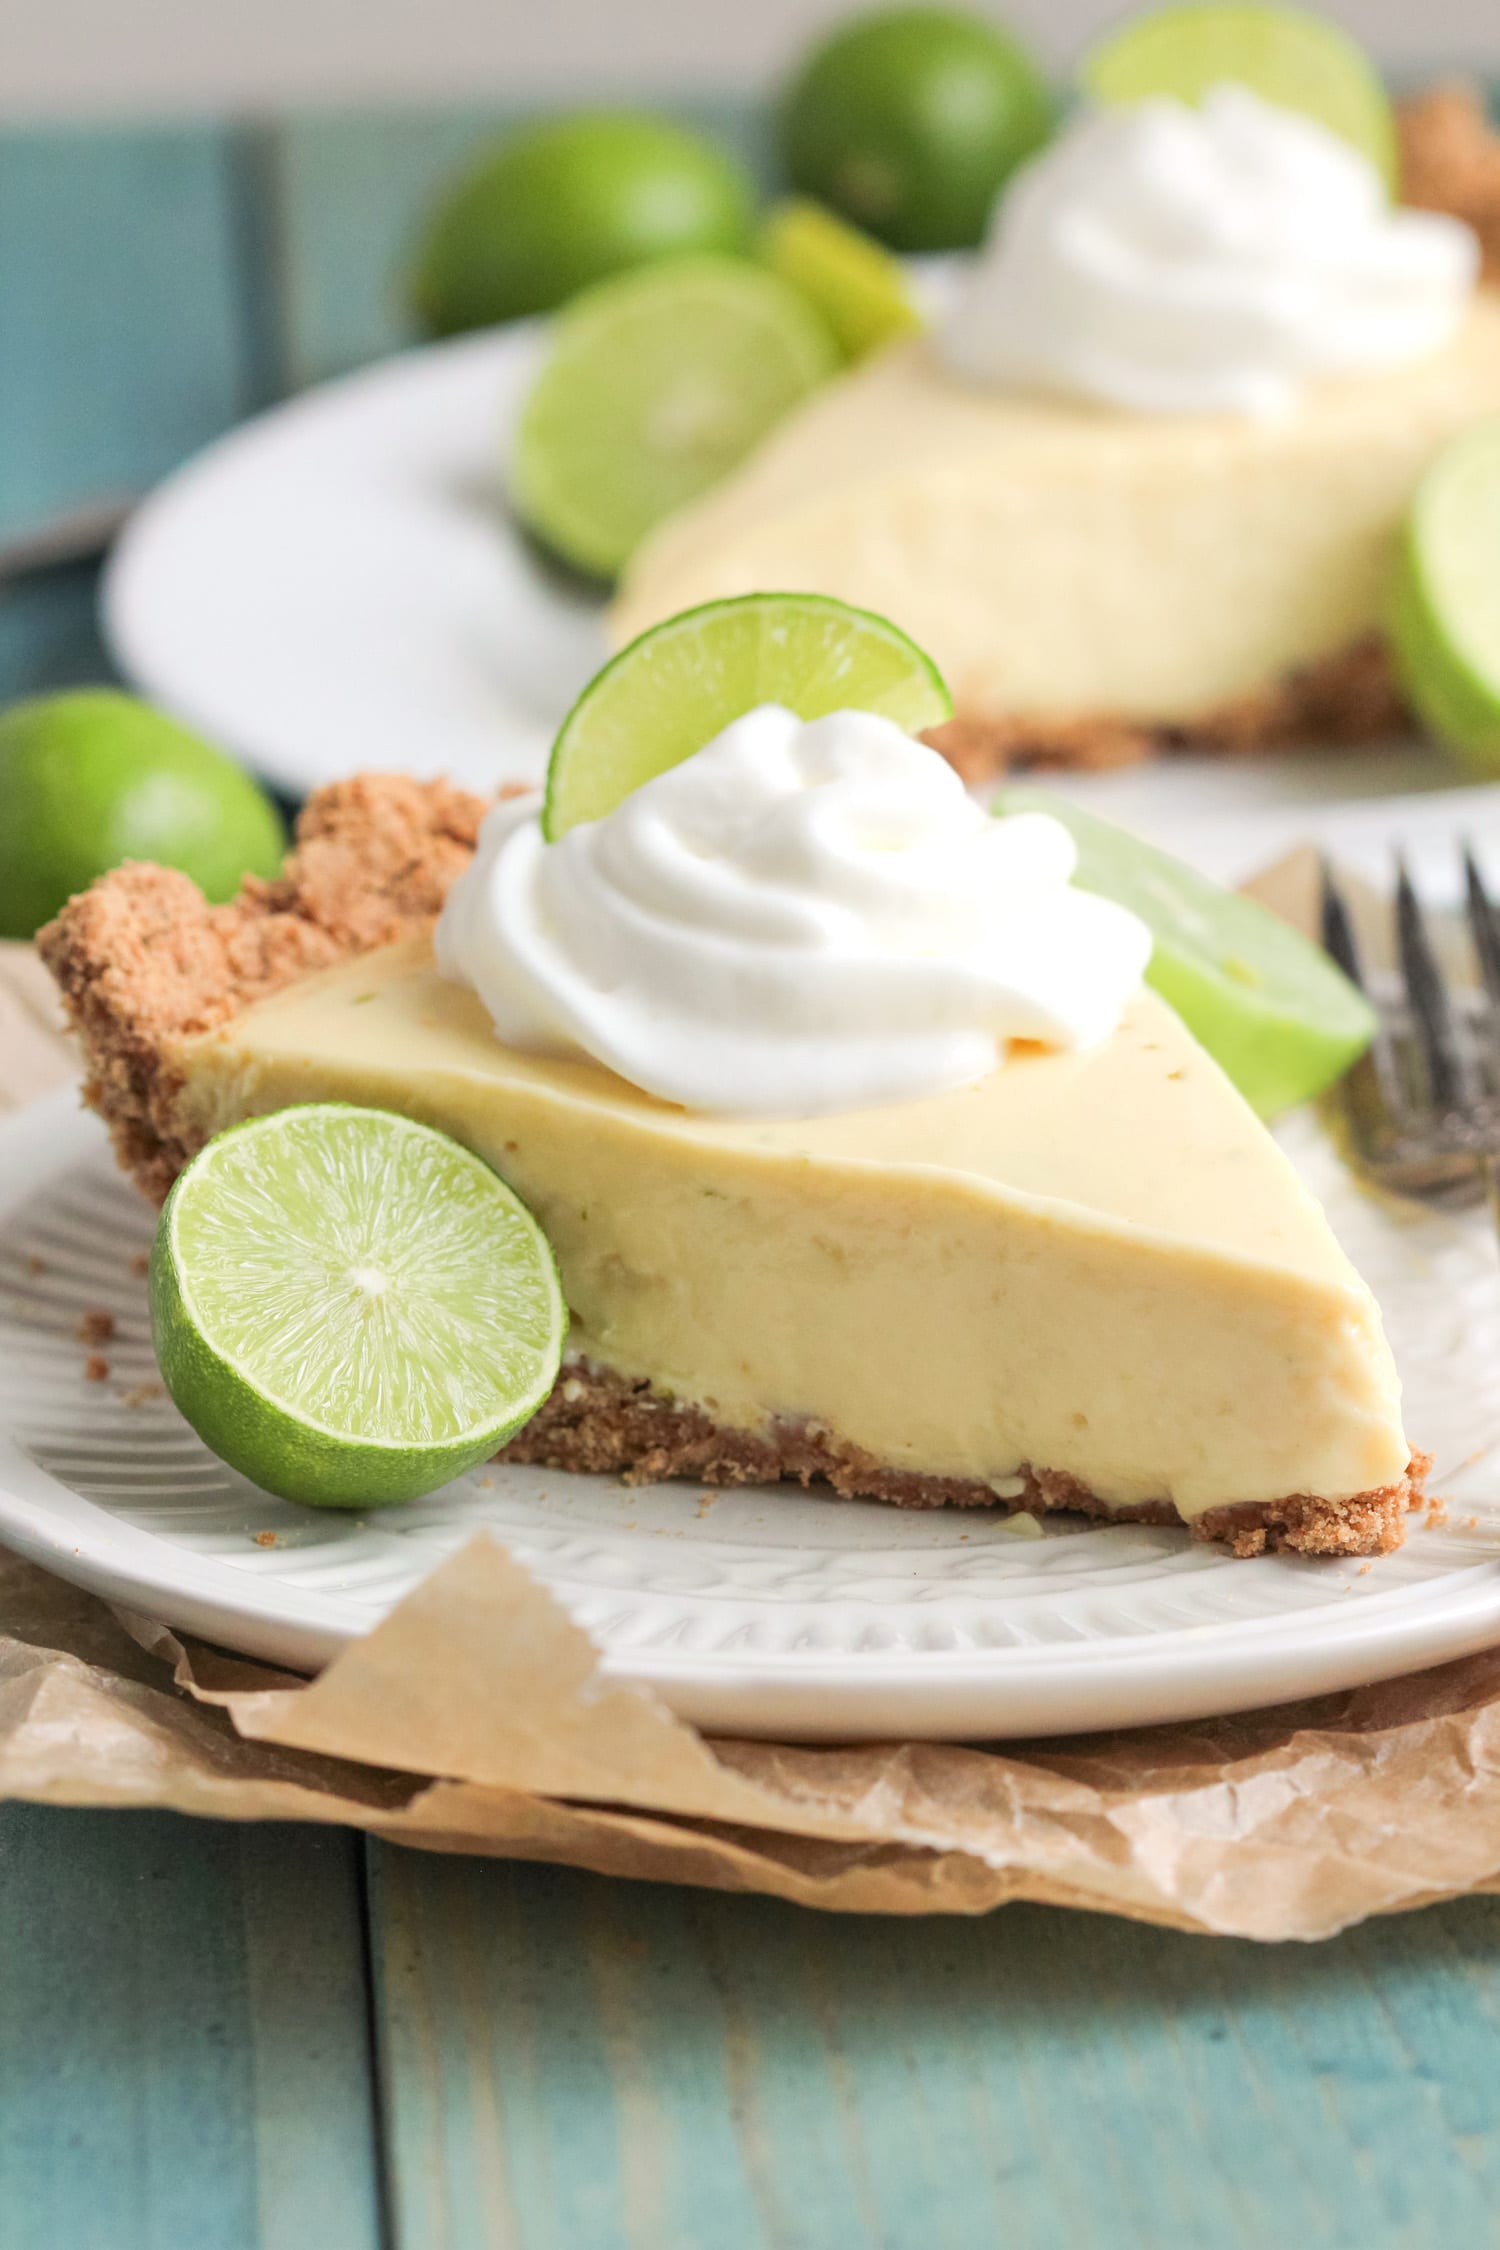 Easy Healthy Key Lime Pie Recipe | Low Fat, Gluten Free, High Protein